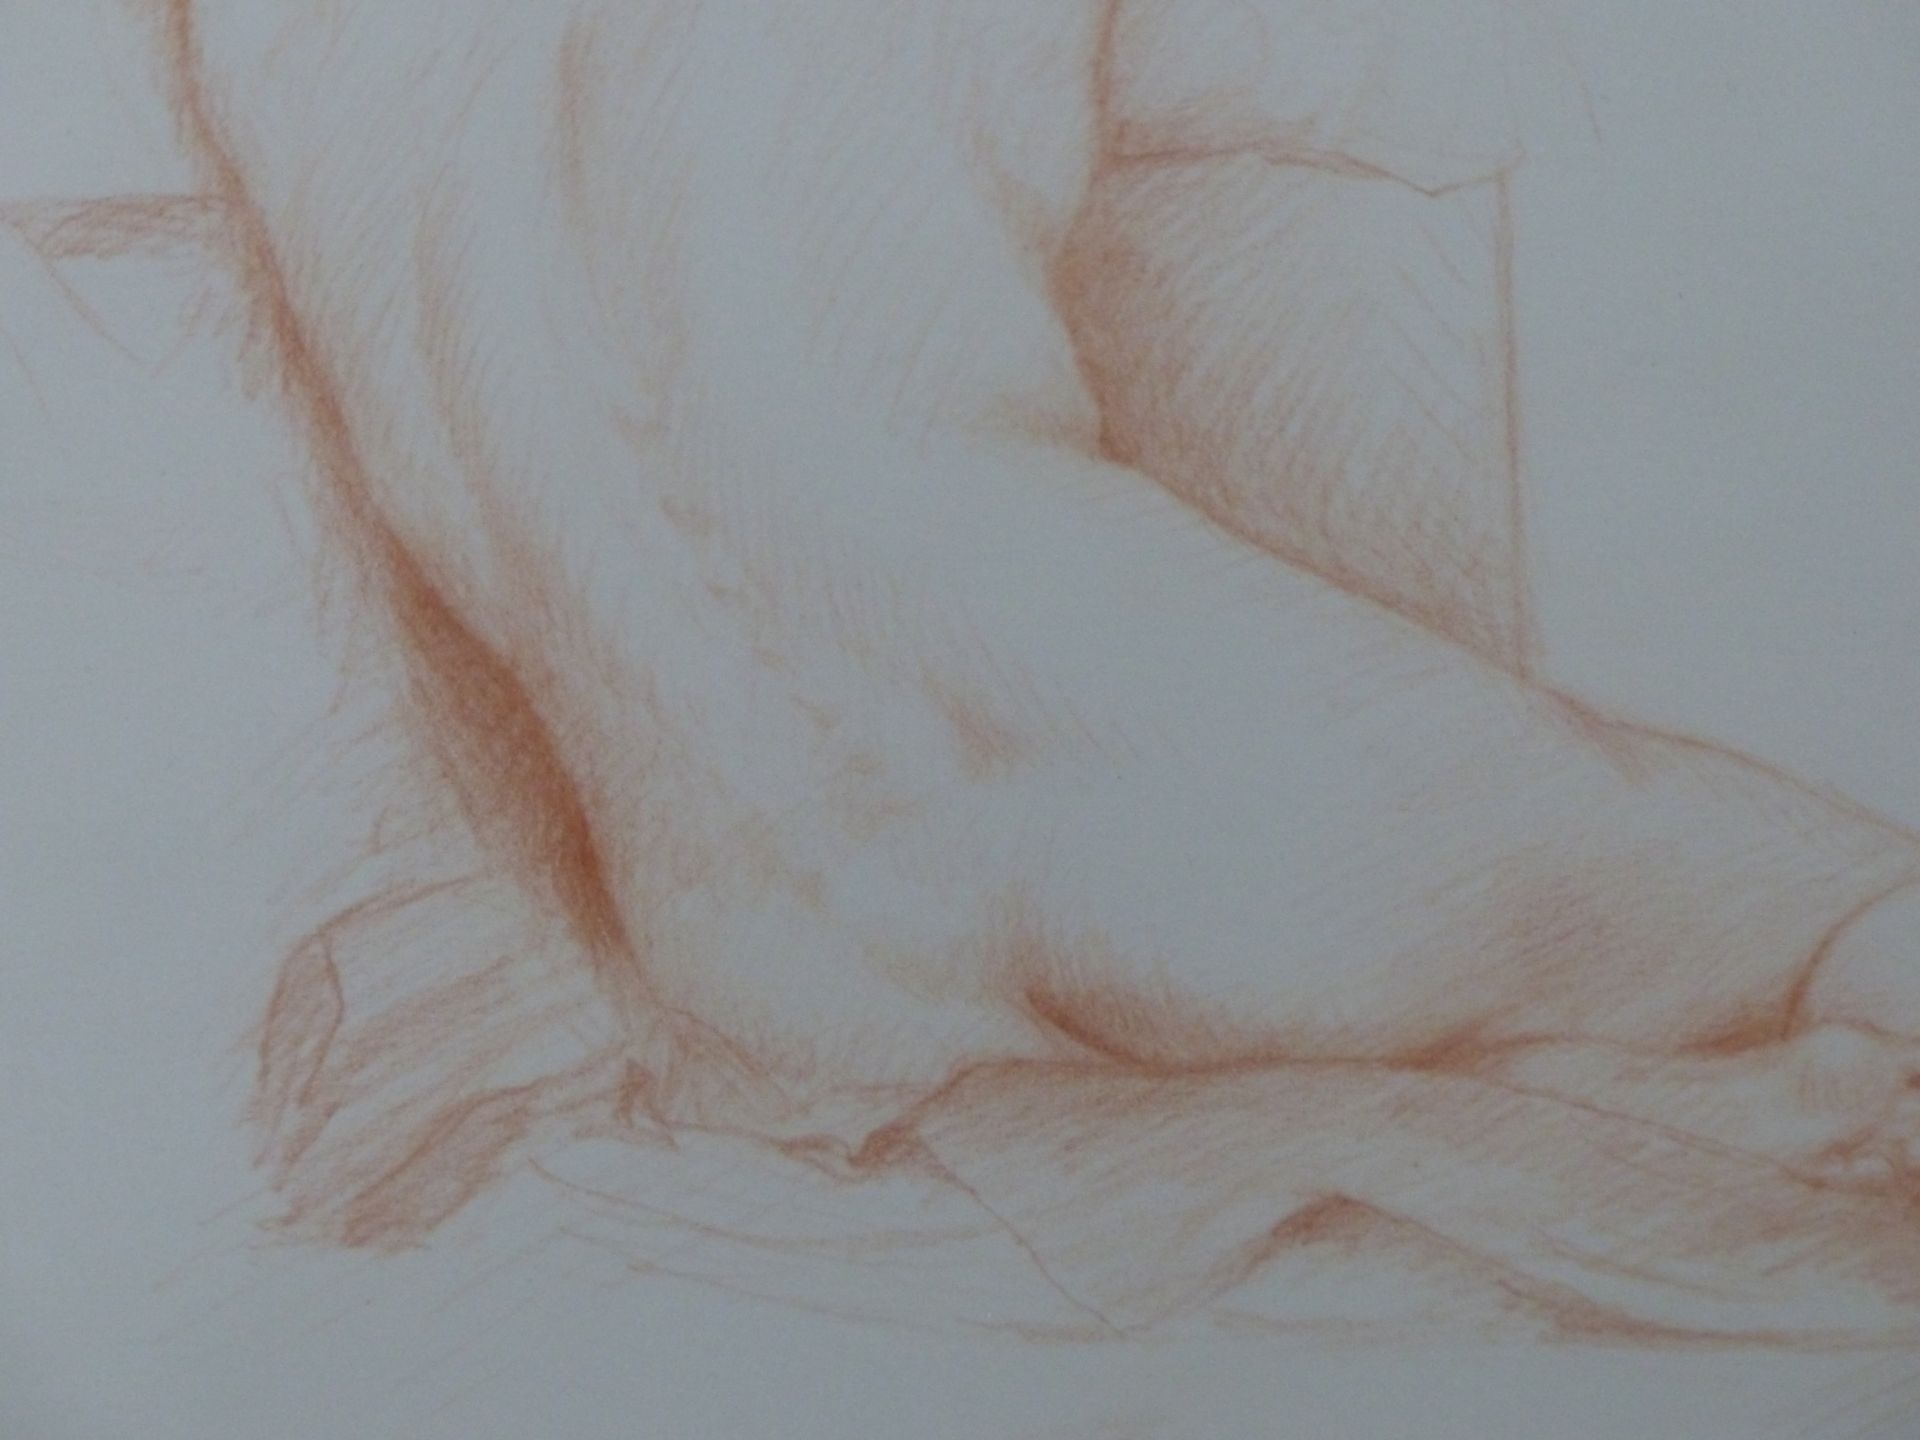 A LATE 20TH CENTURY RED CHALK STUDY OF A NUDE, INDISTINCTLY SIGNED (GUMB?) AND DATED '97, EXHIBITION - Image 5 of 10